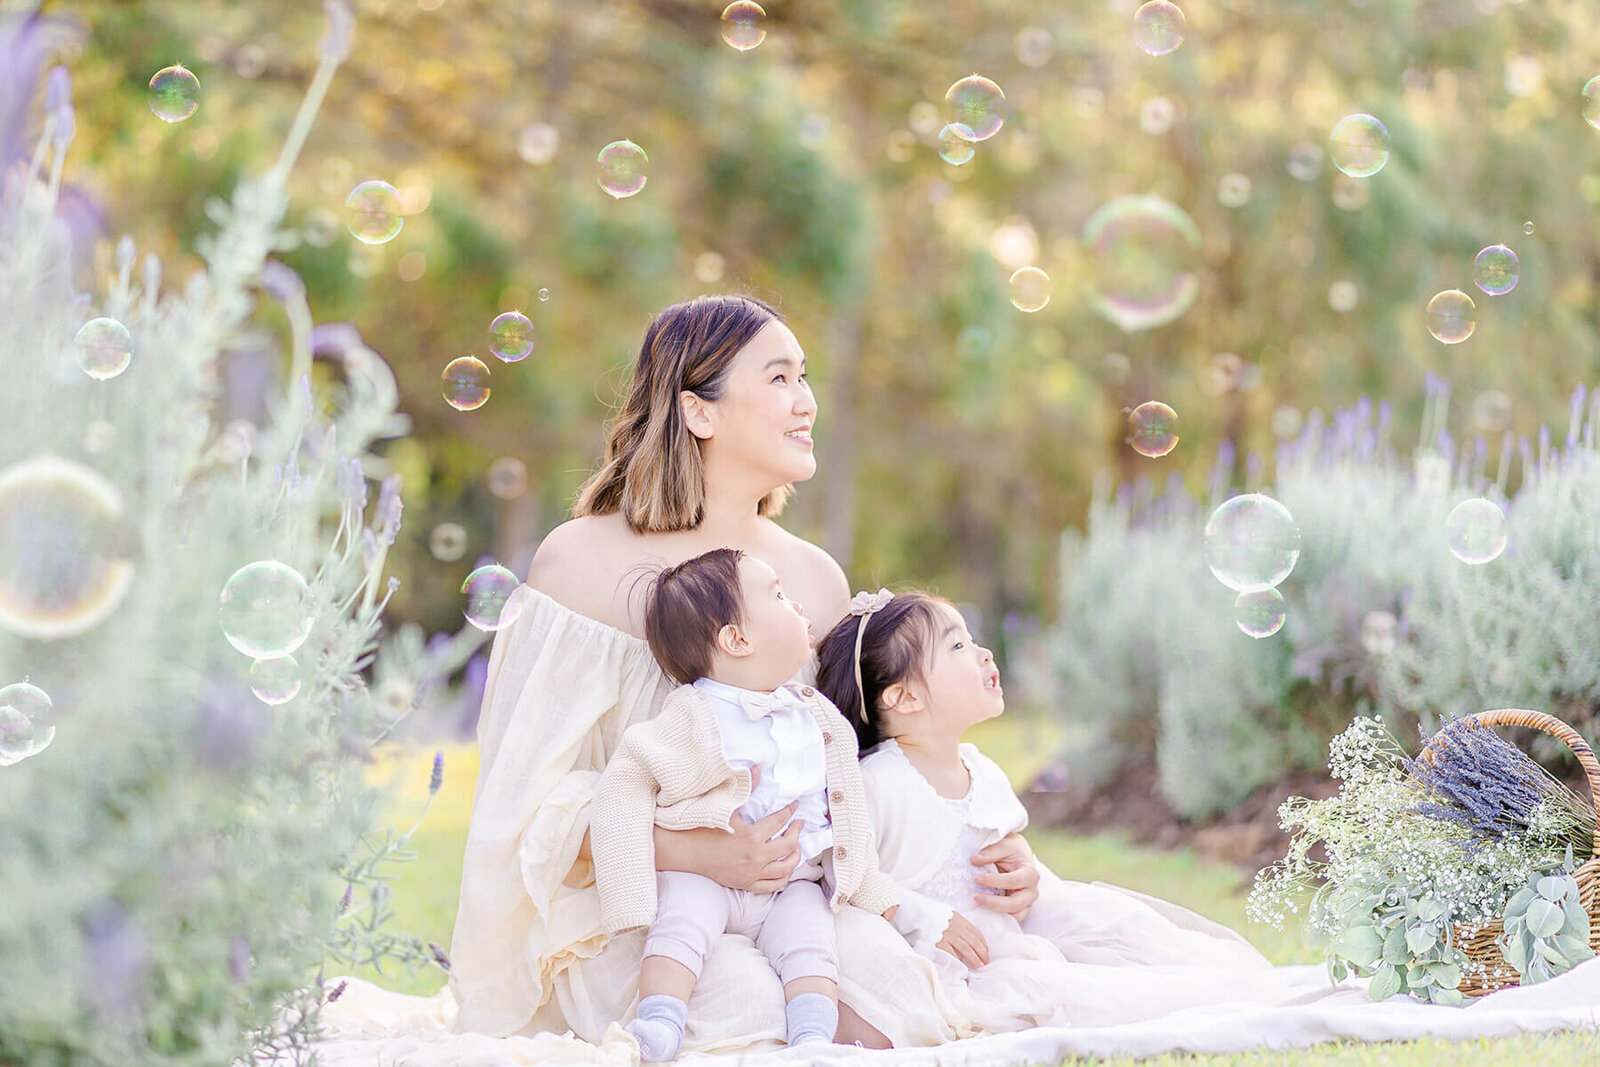 mum holding two young kids in brisbane sirromet lavender field blowing bubbles